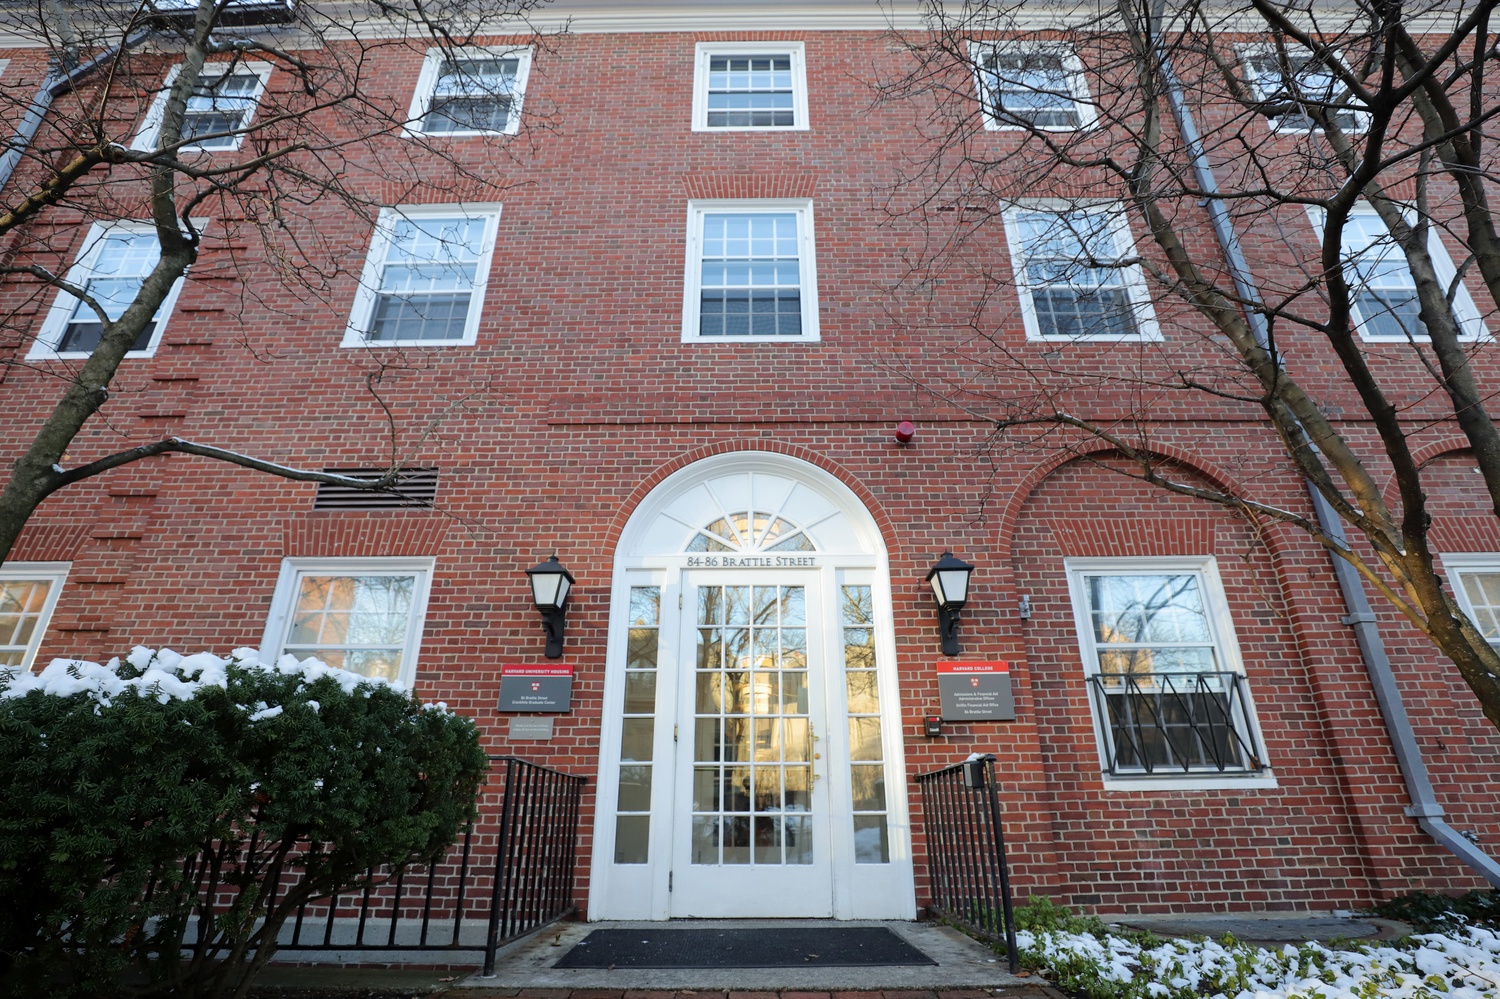 The Harvard College Office of Admissions and Financial Aid is located in Radcliffe Yard.